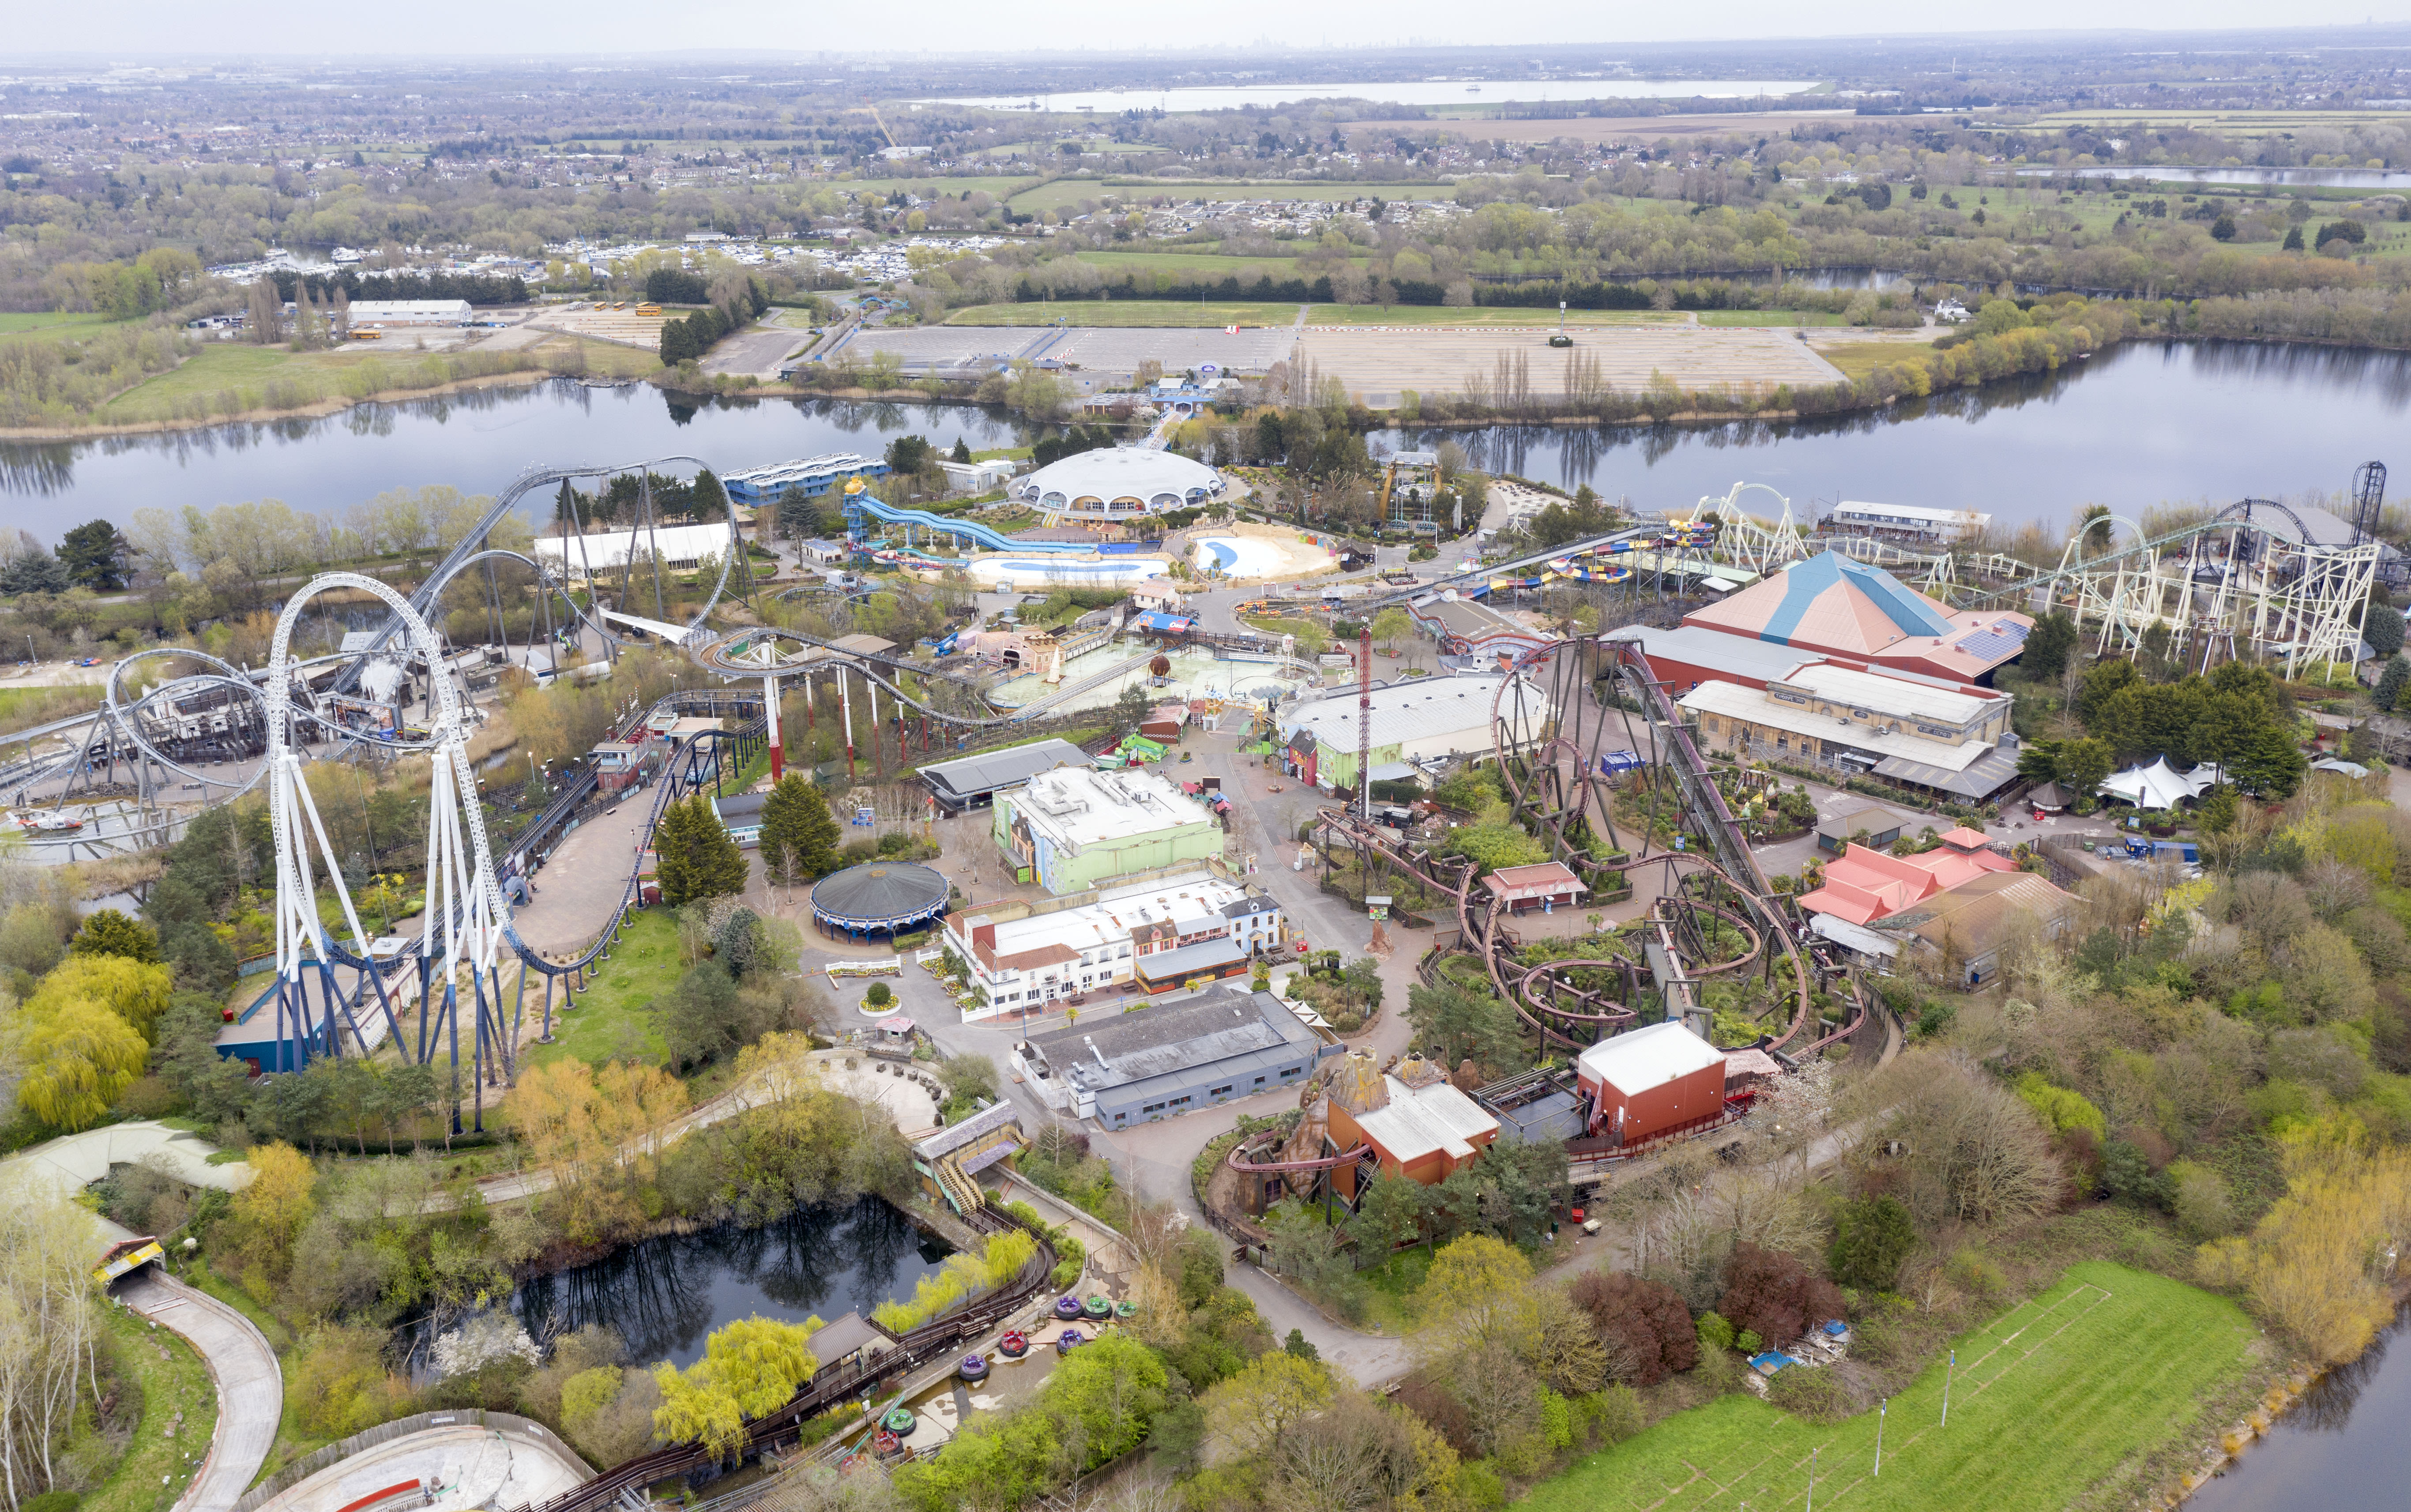 What we know about three children who went missing at Thorpe Park